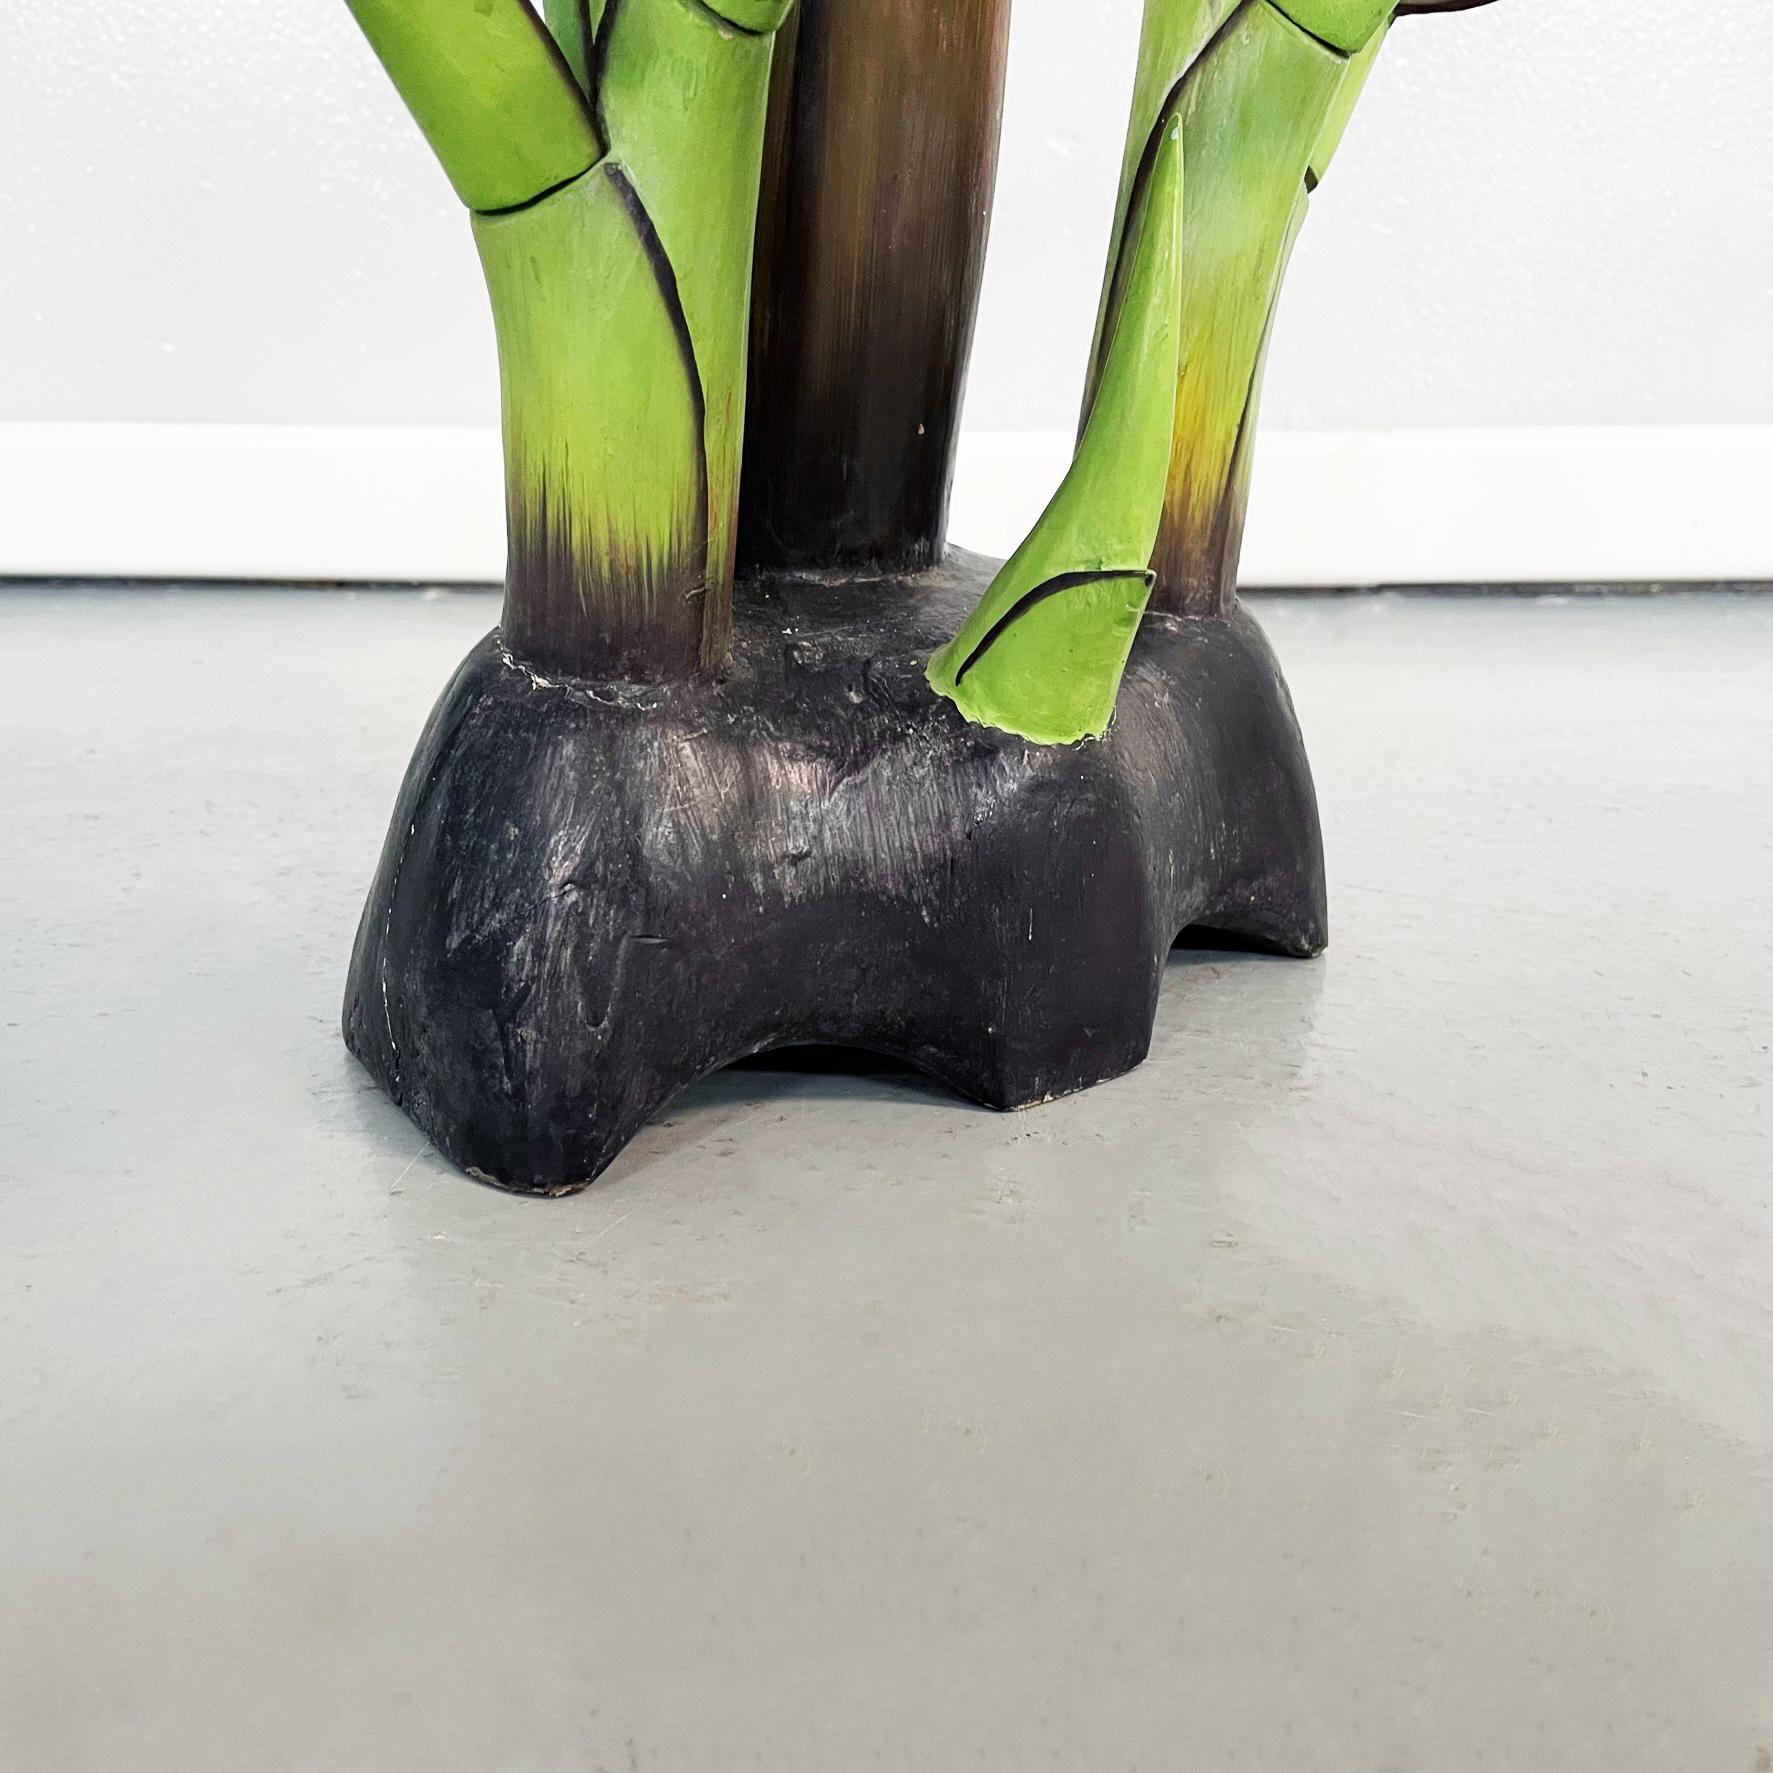 Italian Mid-Century Modern Wooden Sculpture of a Banana Plant, 1950s For Sale 8